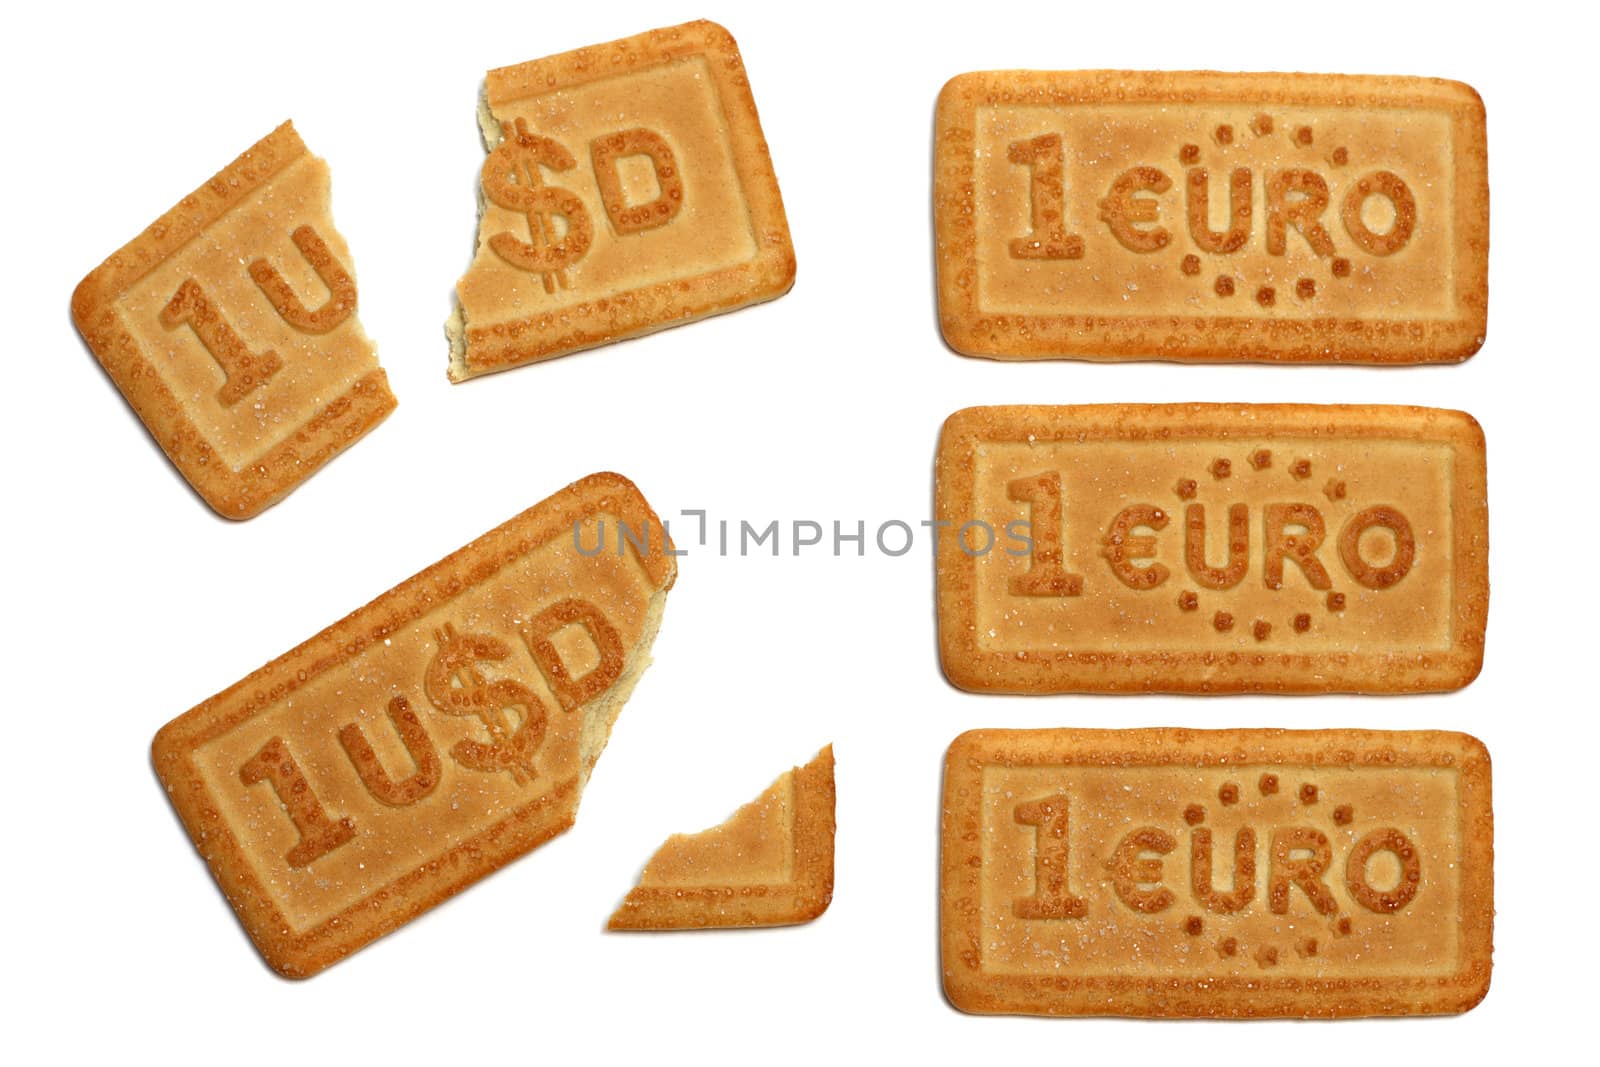 Biscuits in form of dollar and euro bills by Gdolgikh